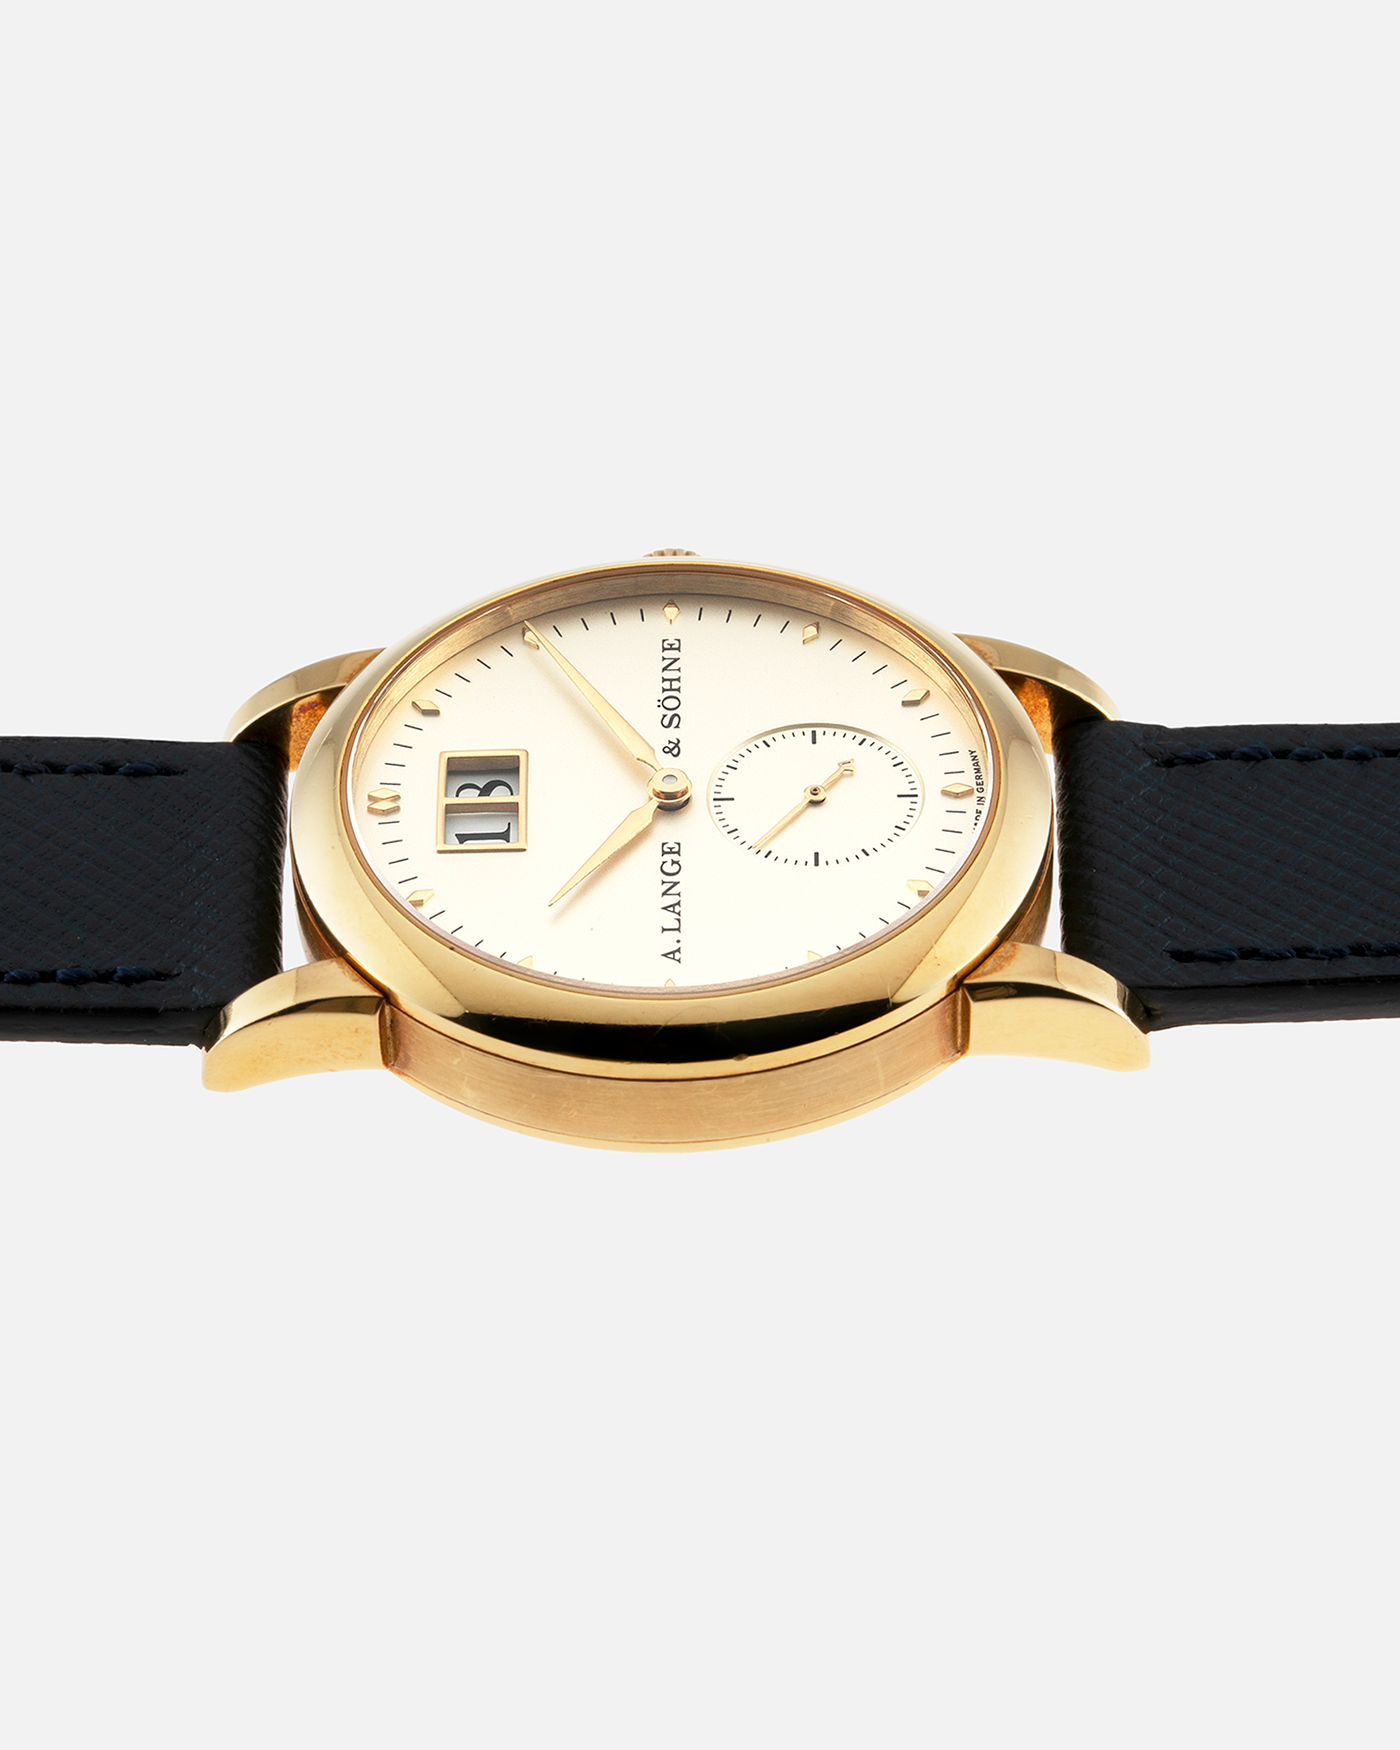 Brand: A. Lange & Sohne Year: Between 1994 - 1996 Model: Saxonia   Reference Number: 102.011 Material: 18-carat Yellow Gold Movement: Cal. L911.3, Manual-Wind Case Diameter: 34mm x 9.1mm Bracelet/Strap: Navy Blue Molequin Textured Leather and A. Lange & Sohne Black Alligator with Signed 18-carat Yellow Gold Tang Buckle